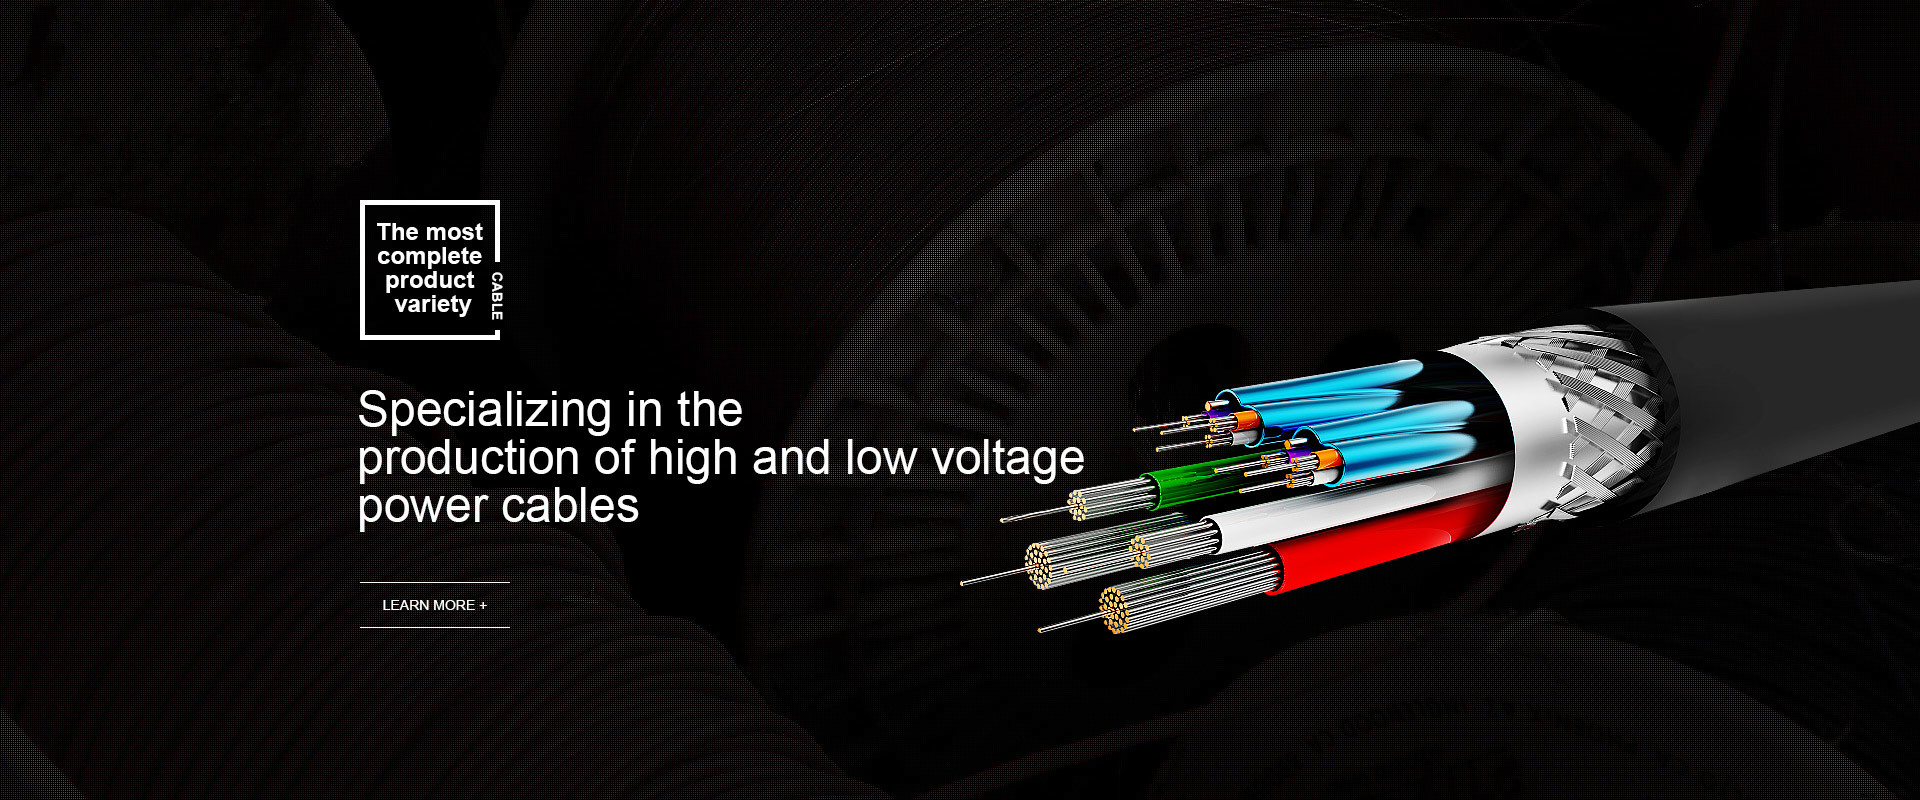 High and low voltage power cables